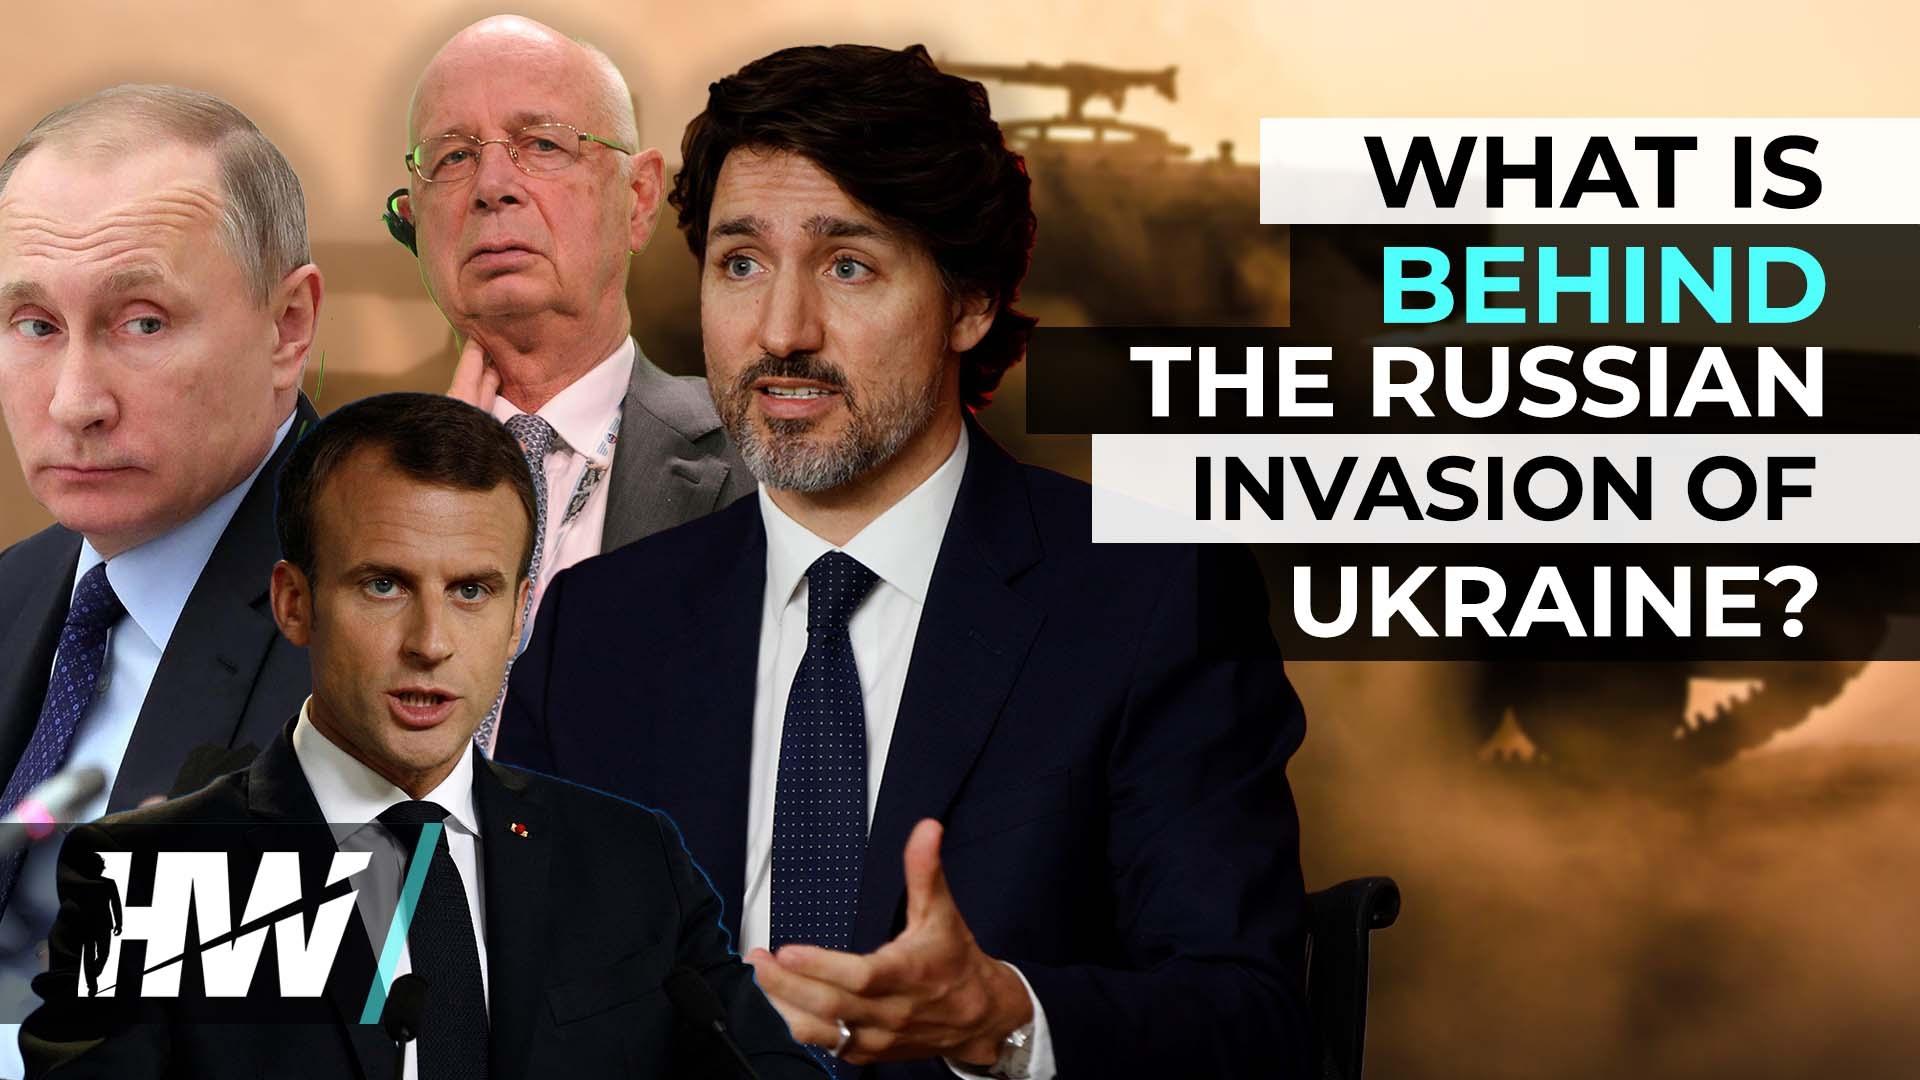 WHAT IS BEHIND THE RUSSIAN INVASION OF UKRAINE?